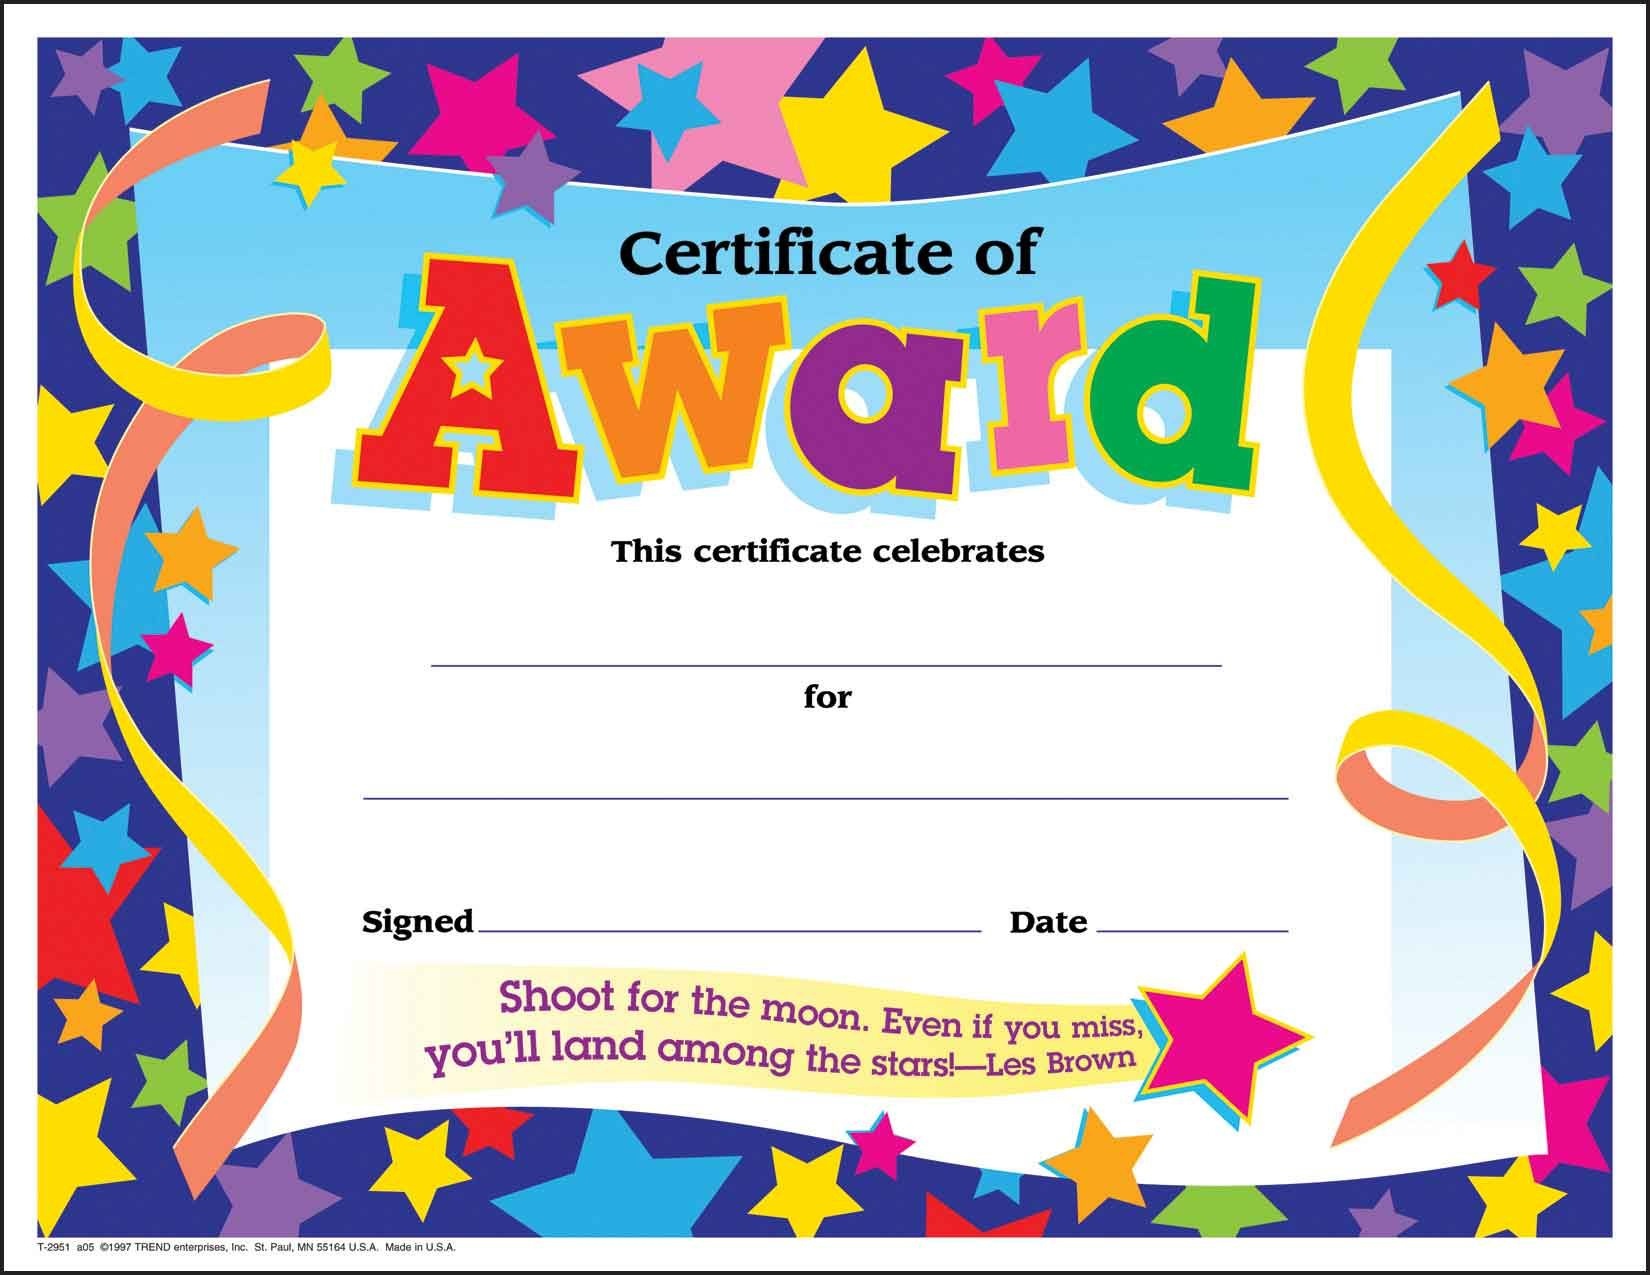 Certificate Template For Kids Free Certificate Templates - Free Printable Certificates And Awards